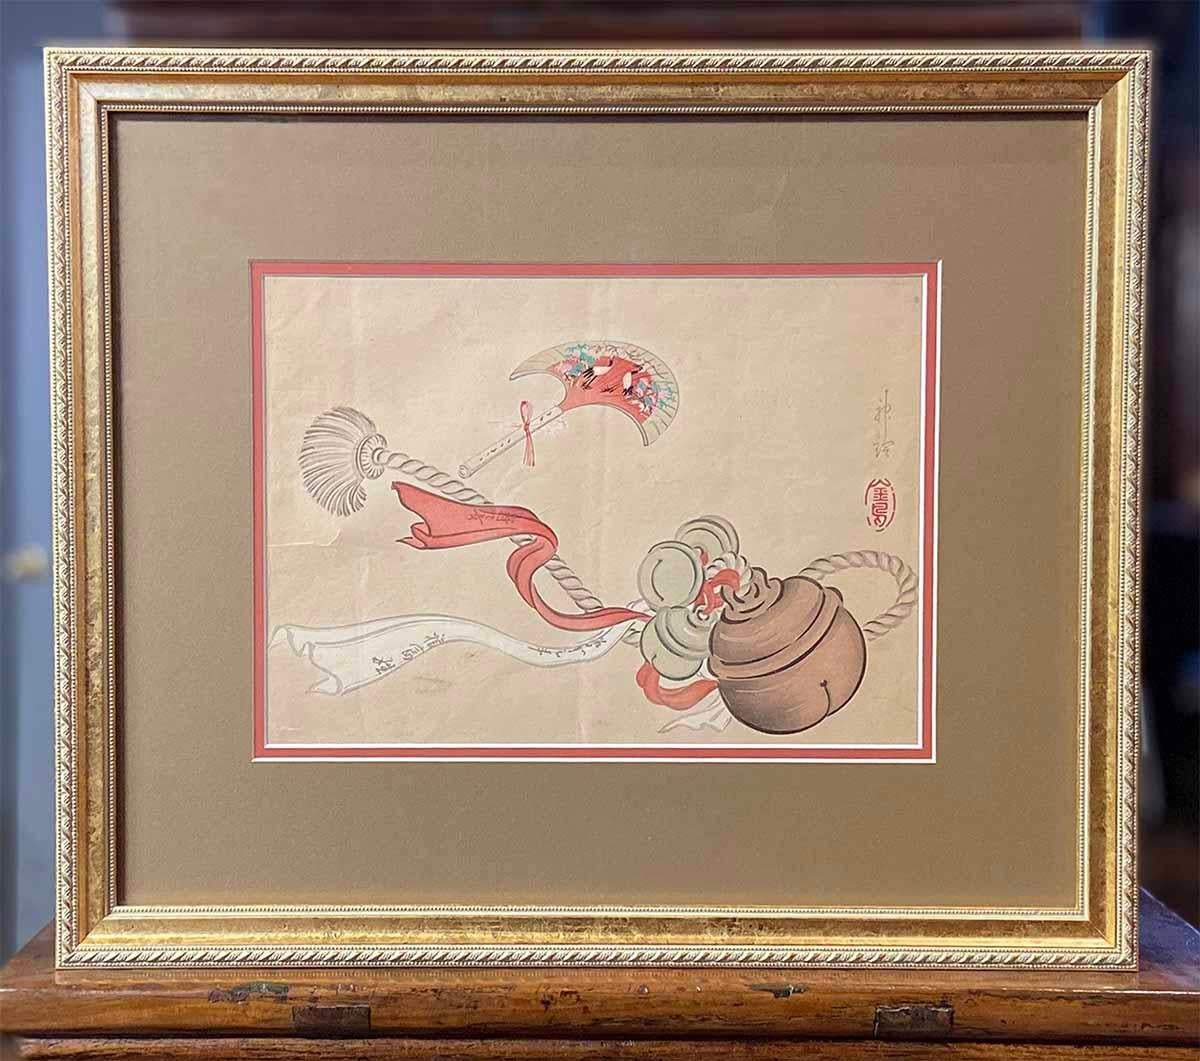 An antique Japanese woodblock print from the 19th century depicting a ceremonial tassel. Created in Japan during the 19th century, this woodblock print attracts our attention with its depiction of ceremonial objects: a ribbon-tied tassel with bells